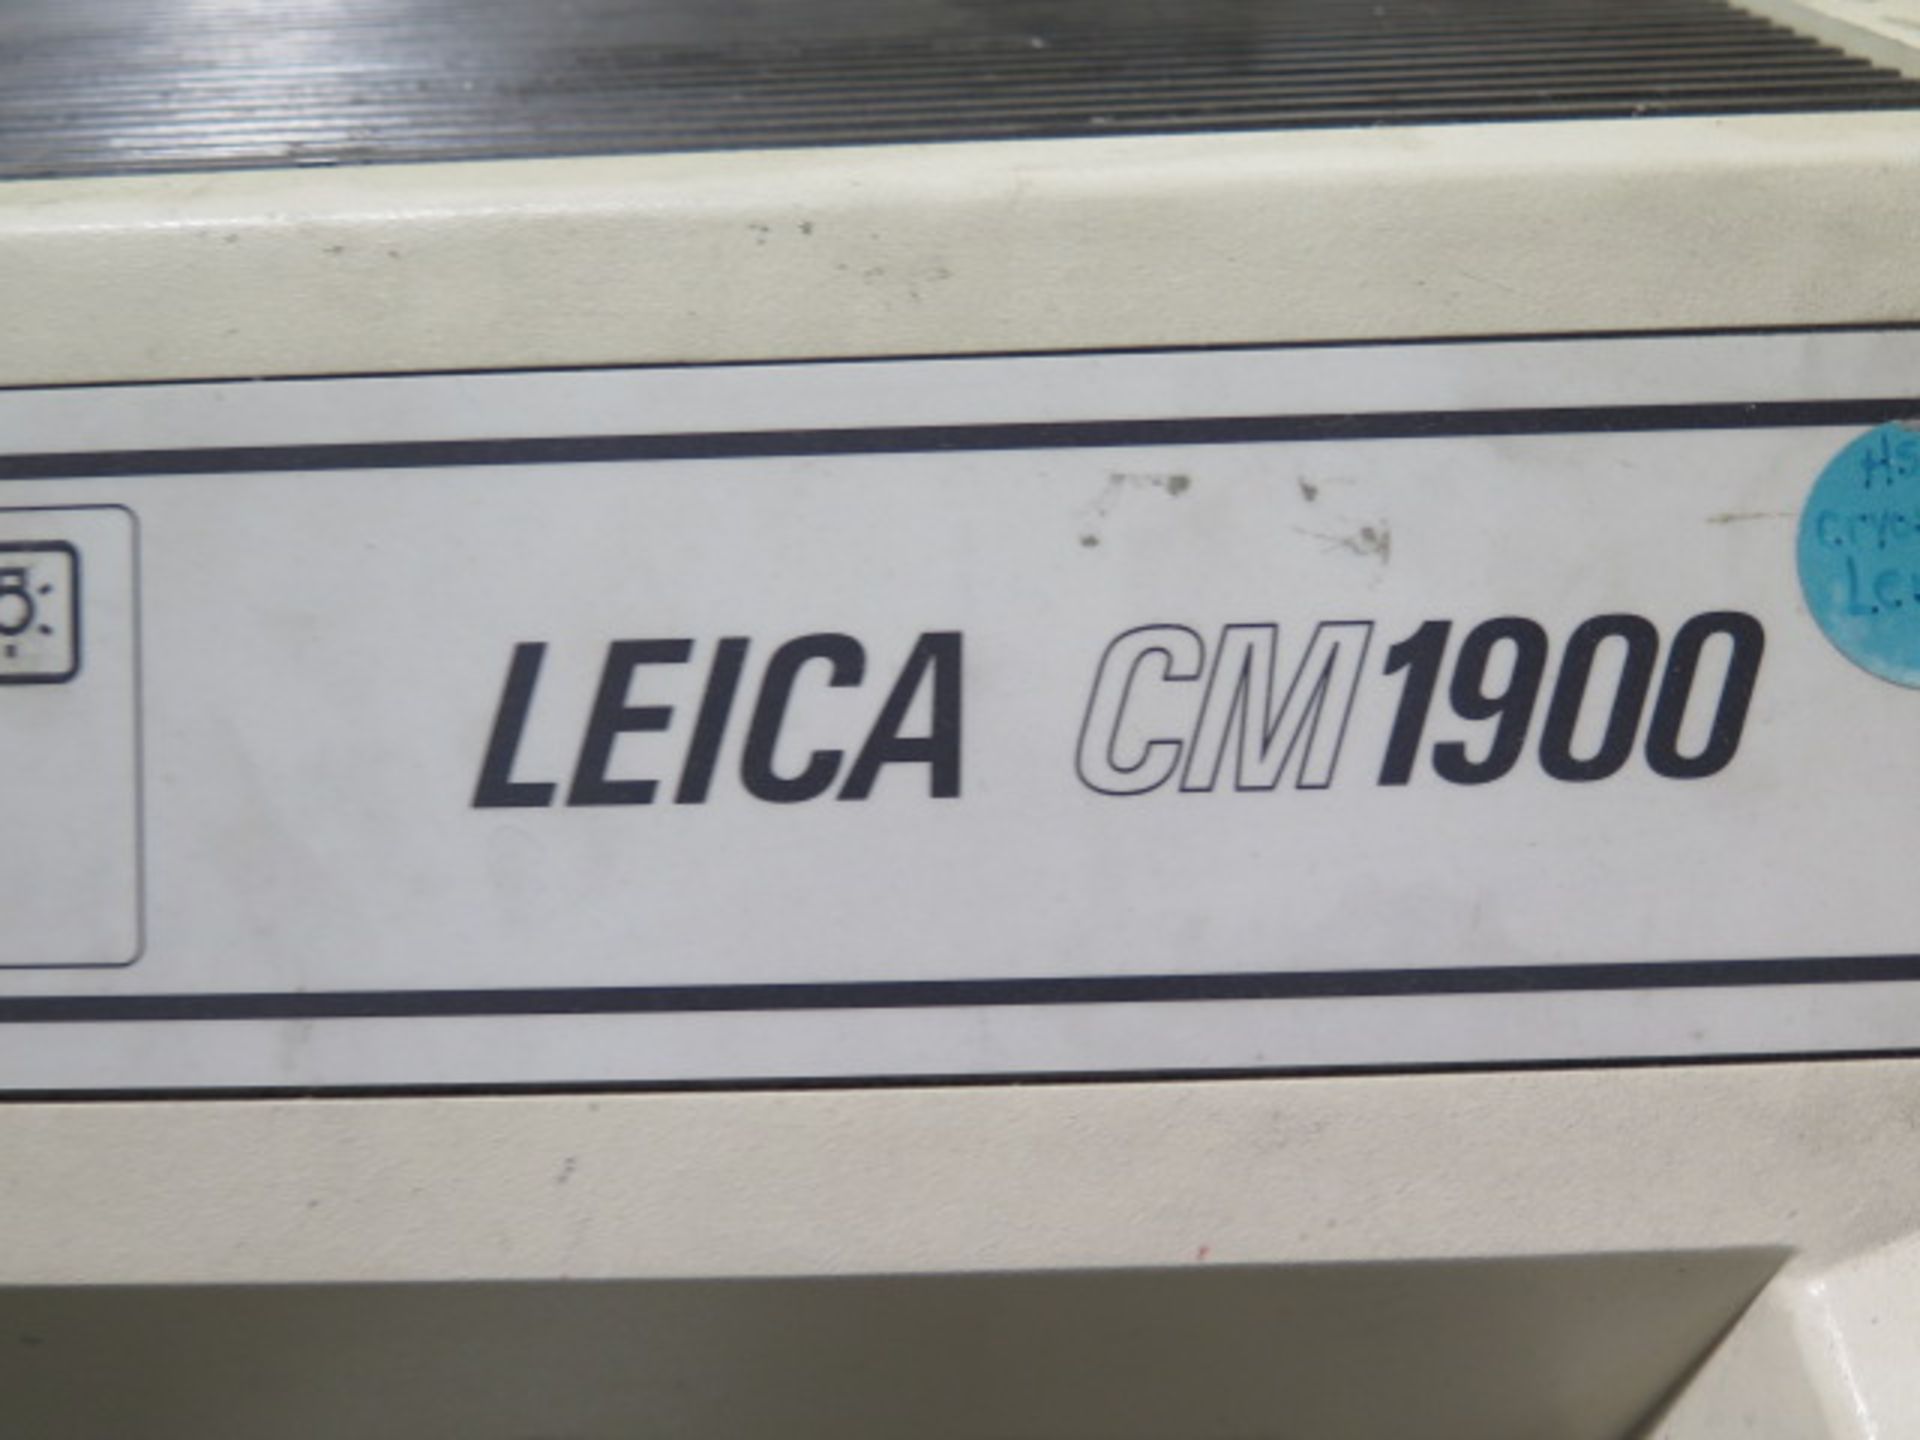 Leica CM1900-6-1 Refrigerated Microtome (SOLD AS-IS - NO WARRANTY) - Image 9 of 10